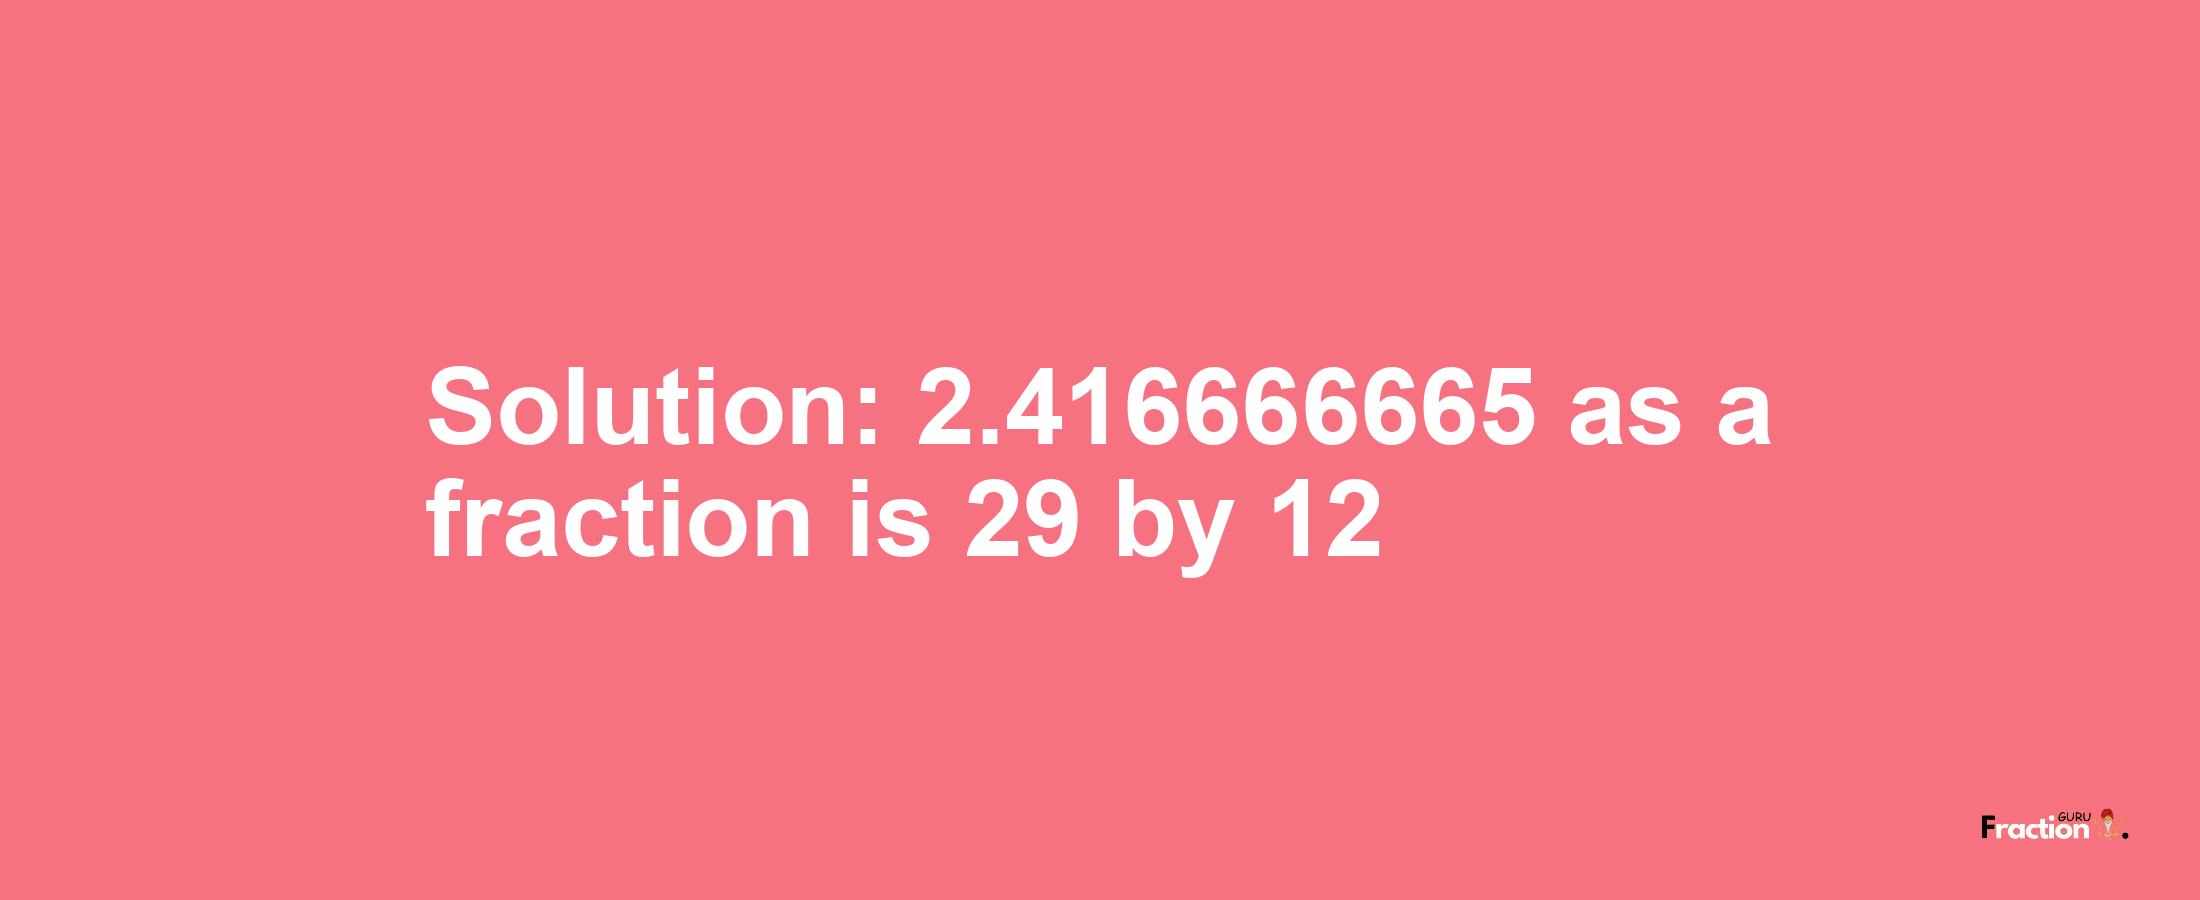 Solution:2.416666665 as a fraction is 29/12